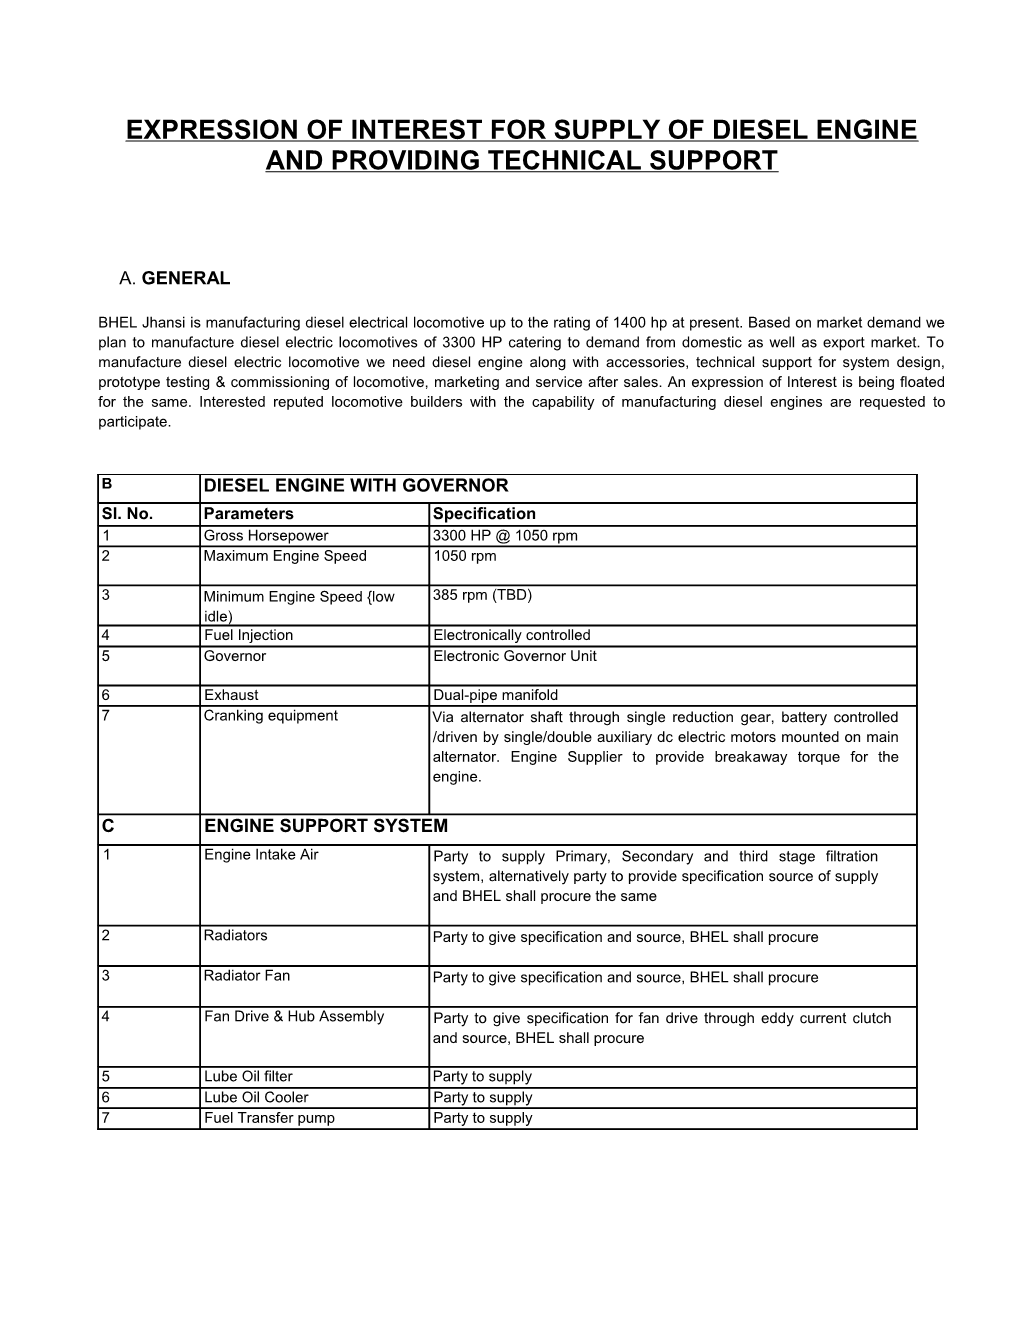 Expression of Interest for Supply of Diesel Engine and Providing Technical Support